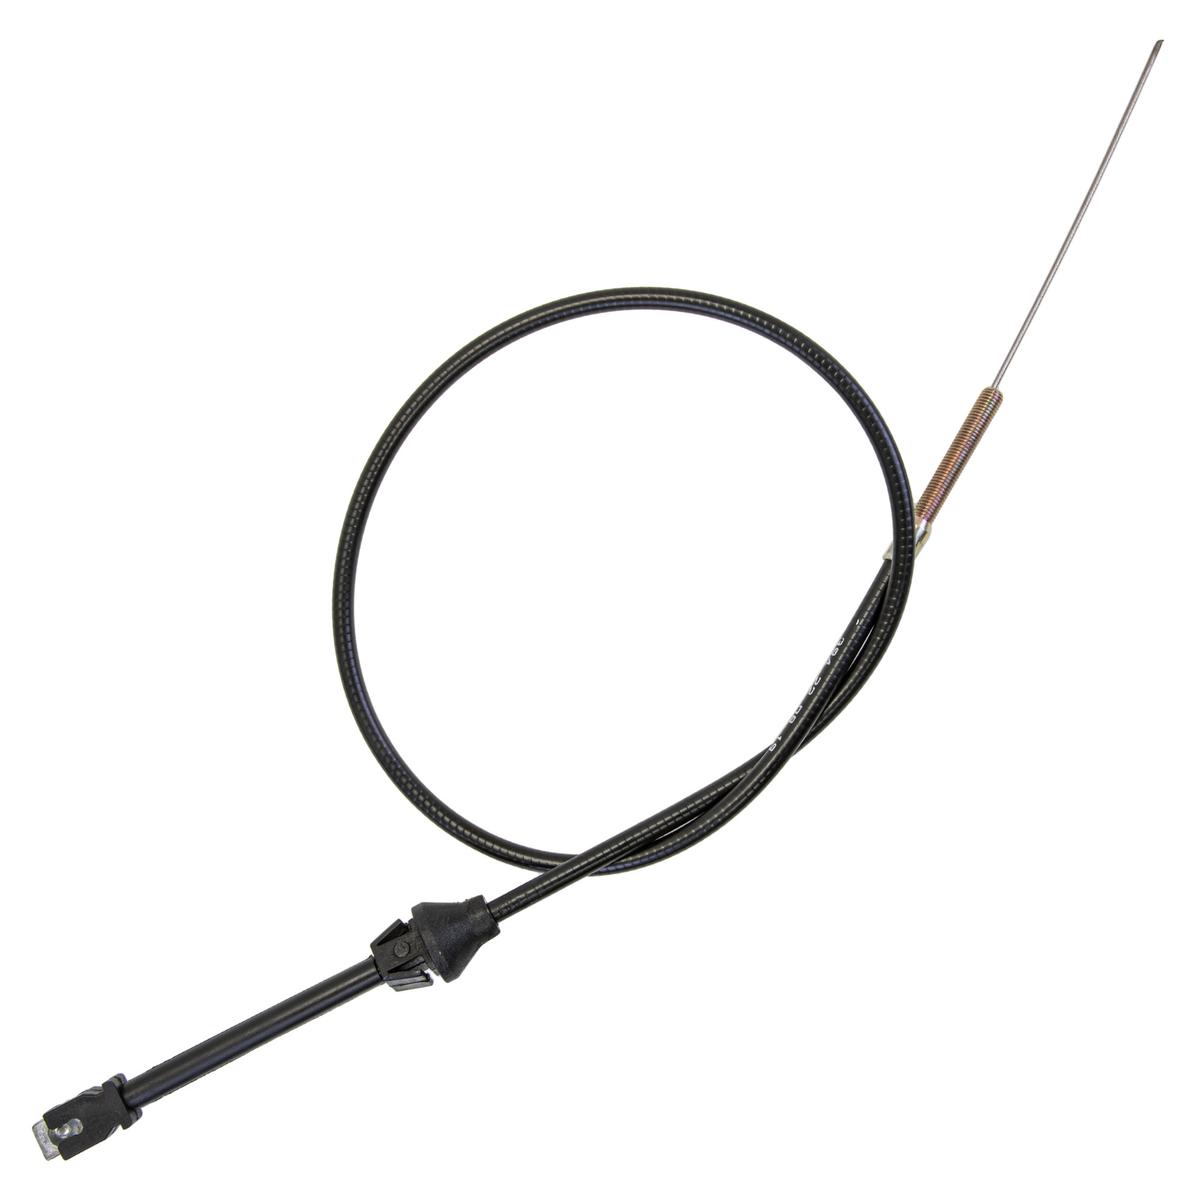 EZGO Accelerator Cable (Years 1983-1987)